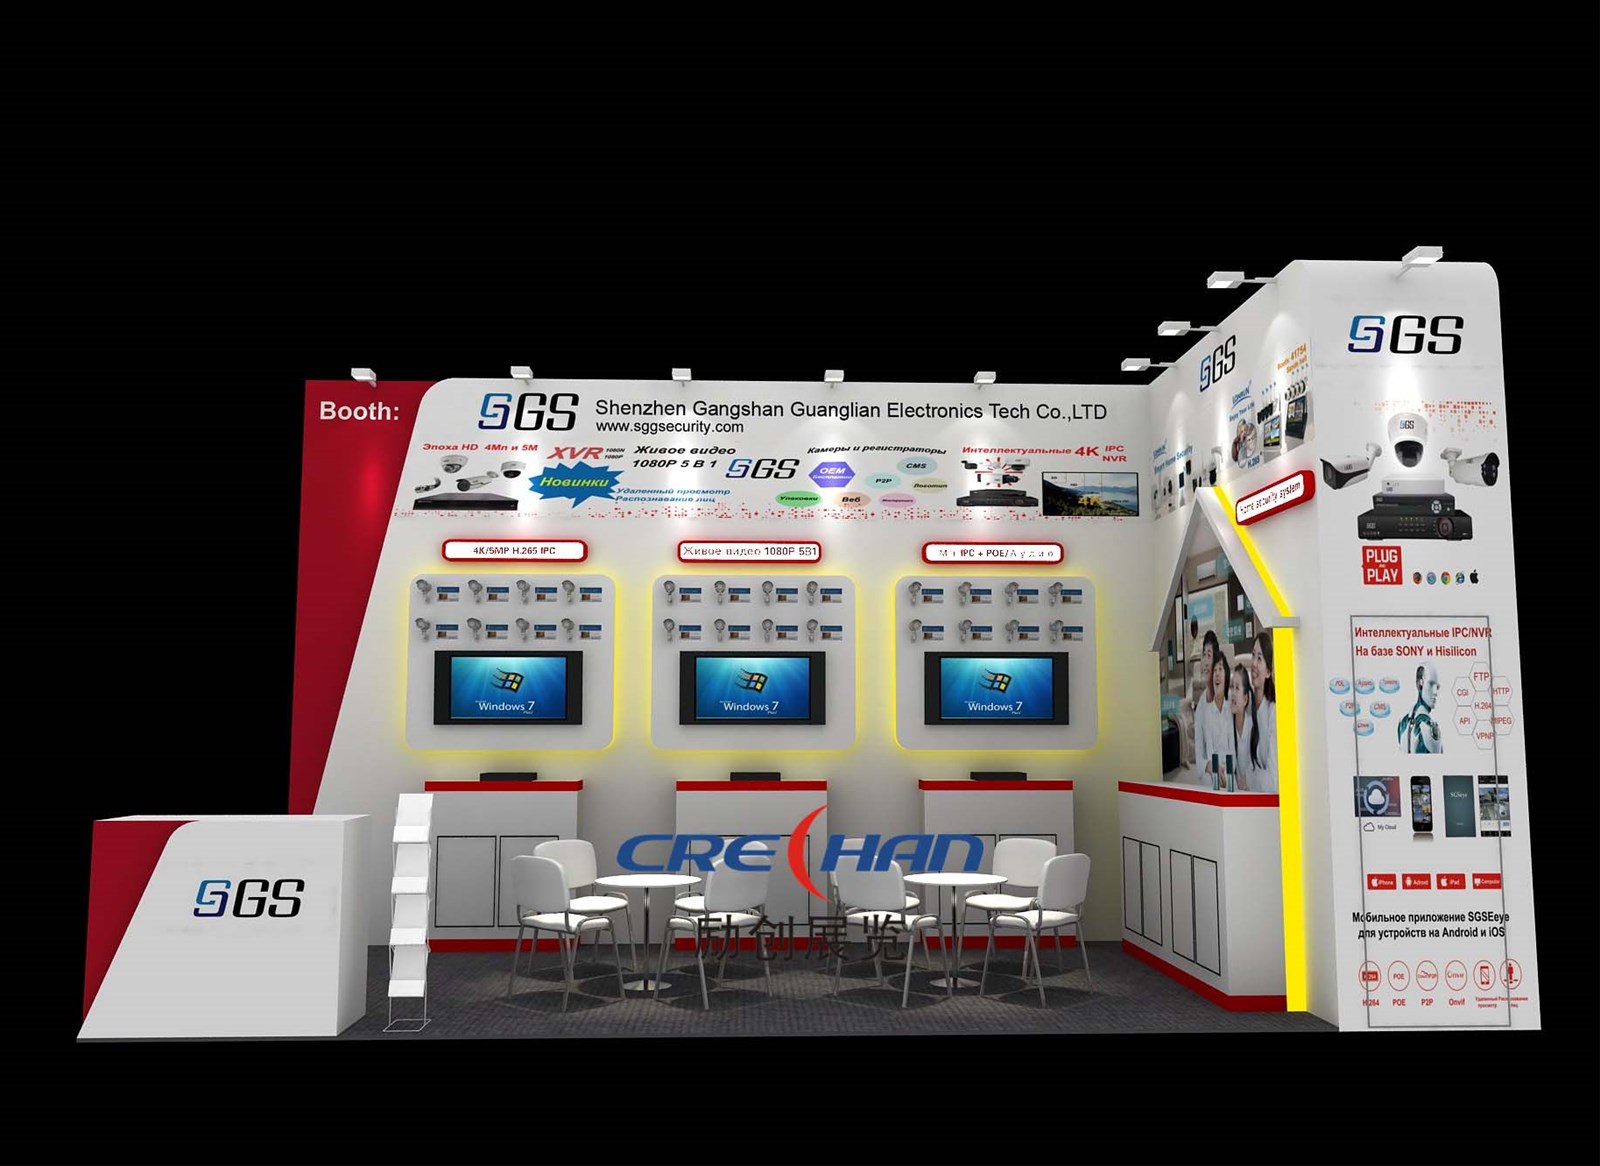 China exhibition trade show booth manufacturerssuppliers of CIFF 2021Guangzhou